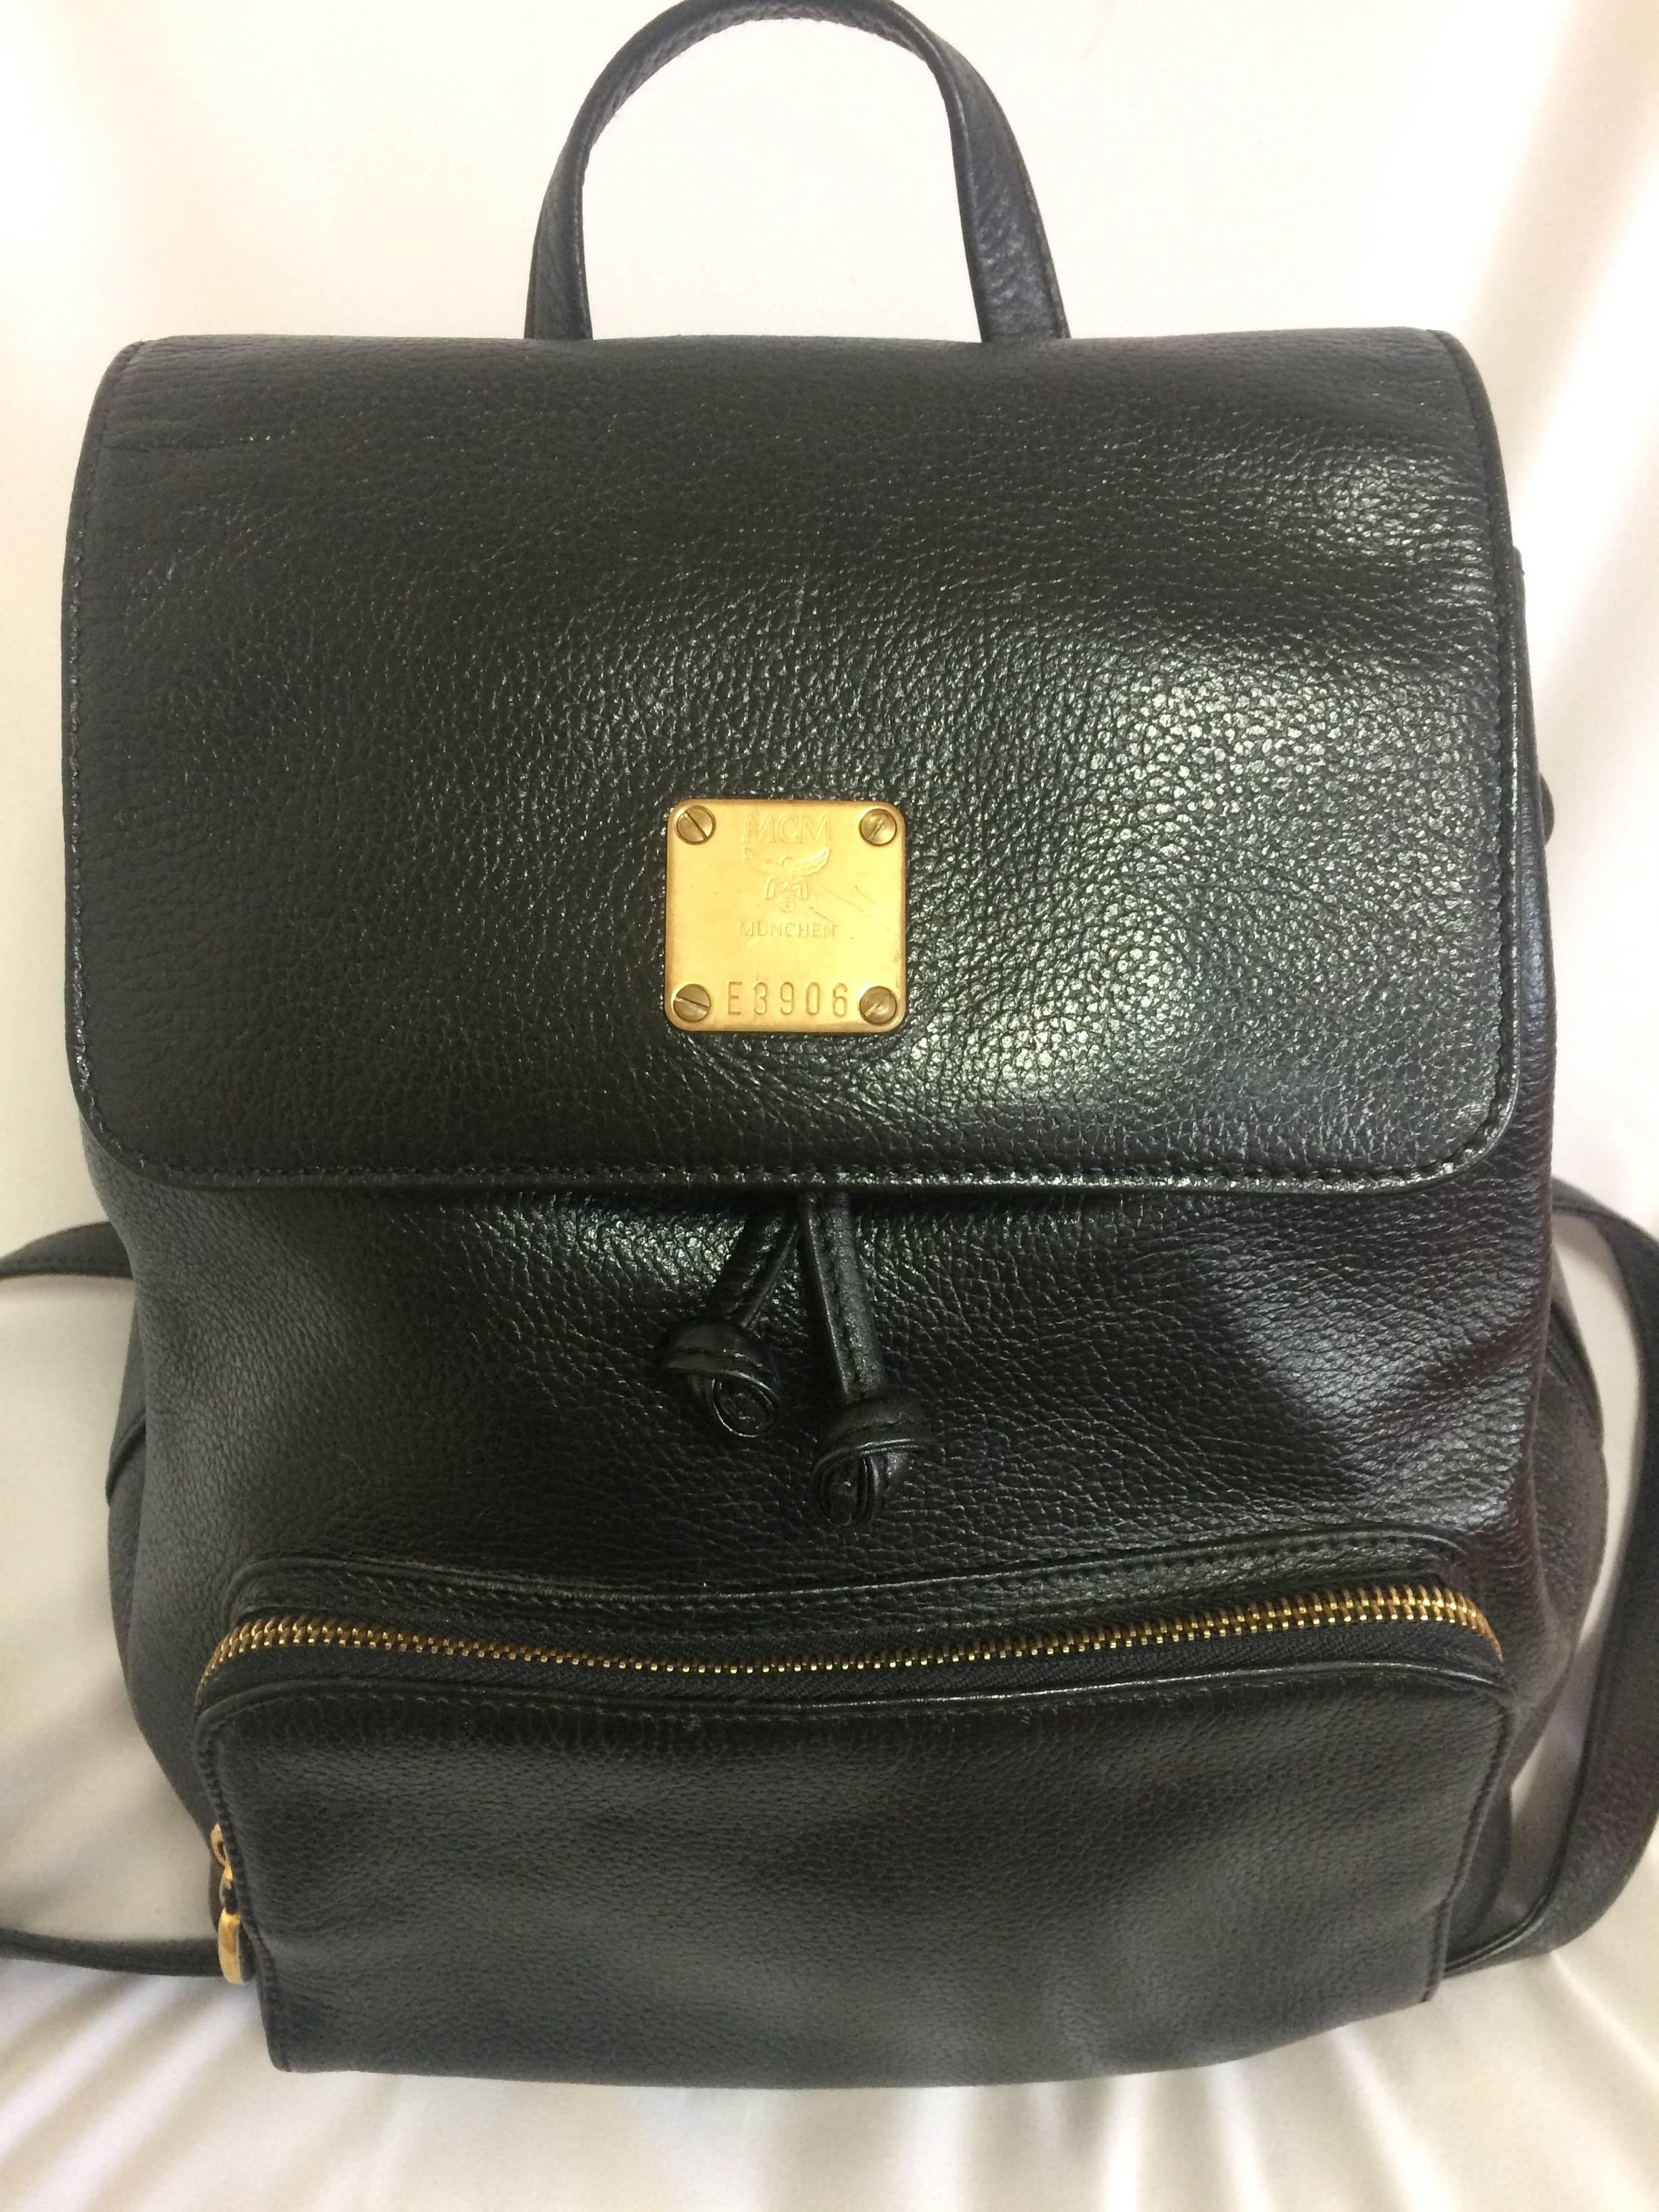 1990s. Vintage MCM black leather backpack with golden studded logo motifs. Designed by Michael Cromer. Unisex bag for daily use.

MCM has now come back in trend and so hot in the market!!

This is the vintage MCM black genuine leather backpack from